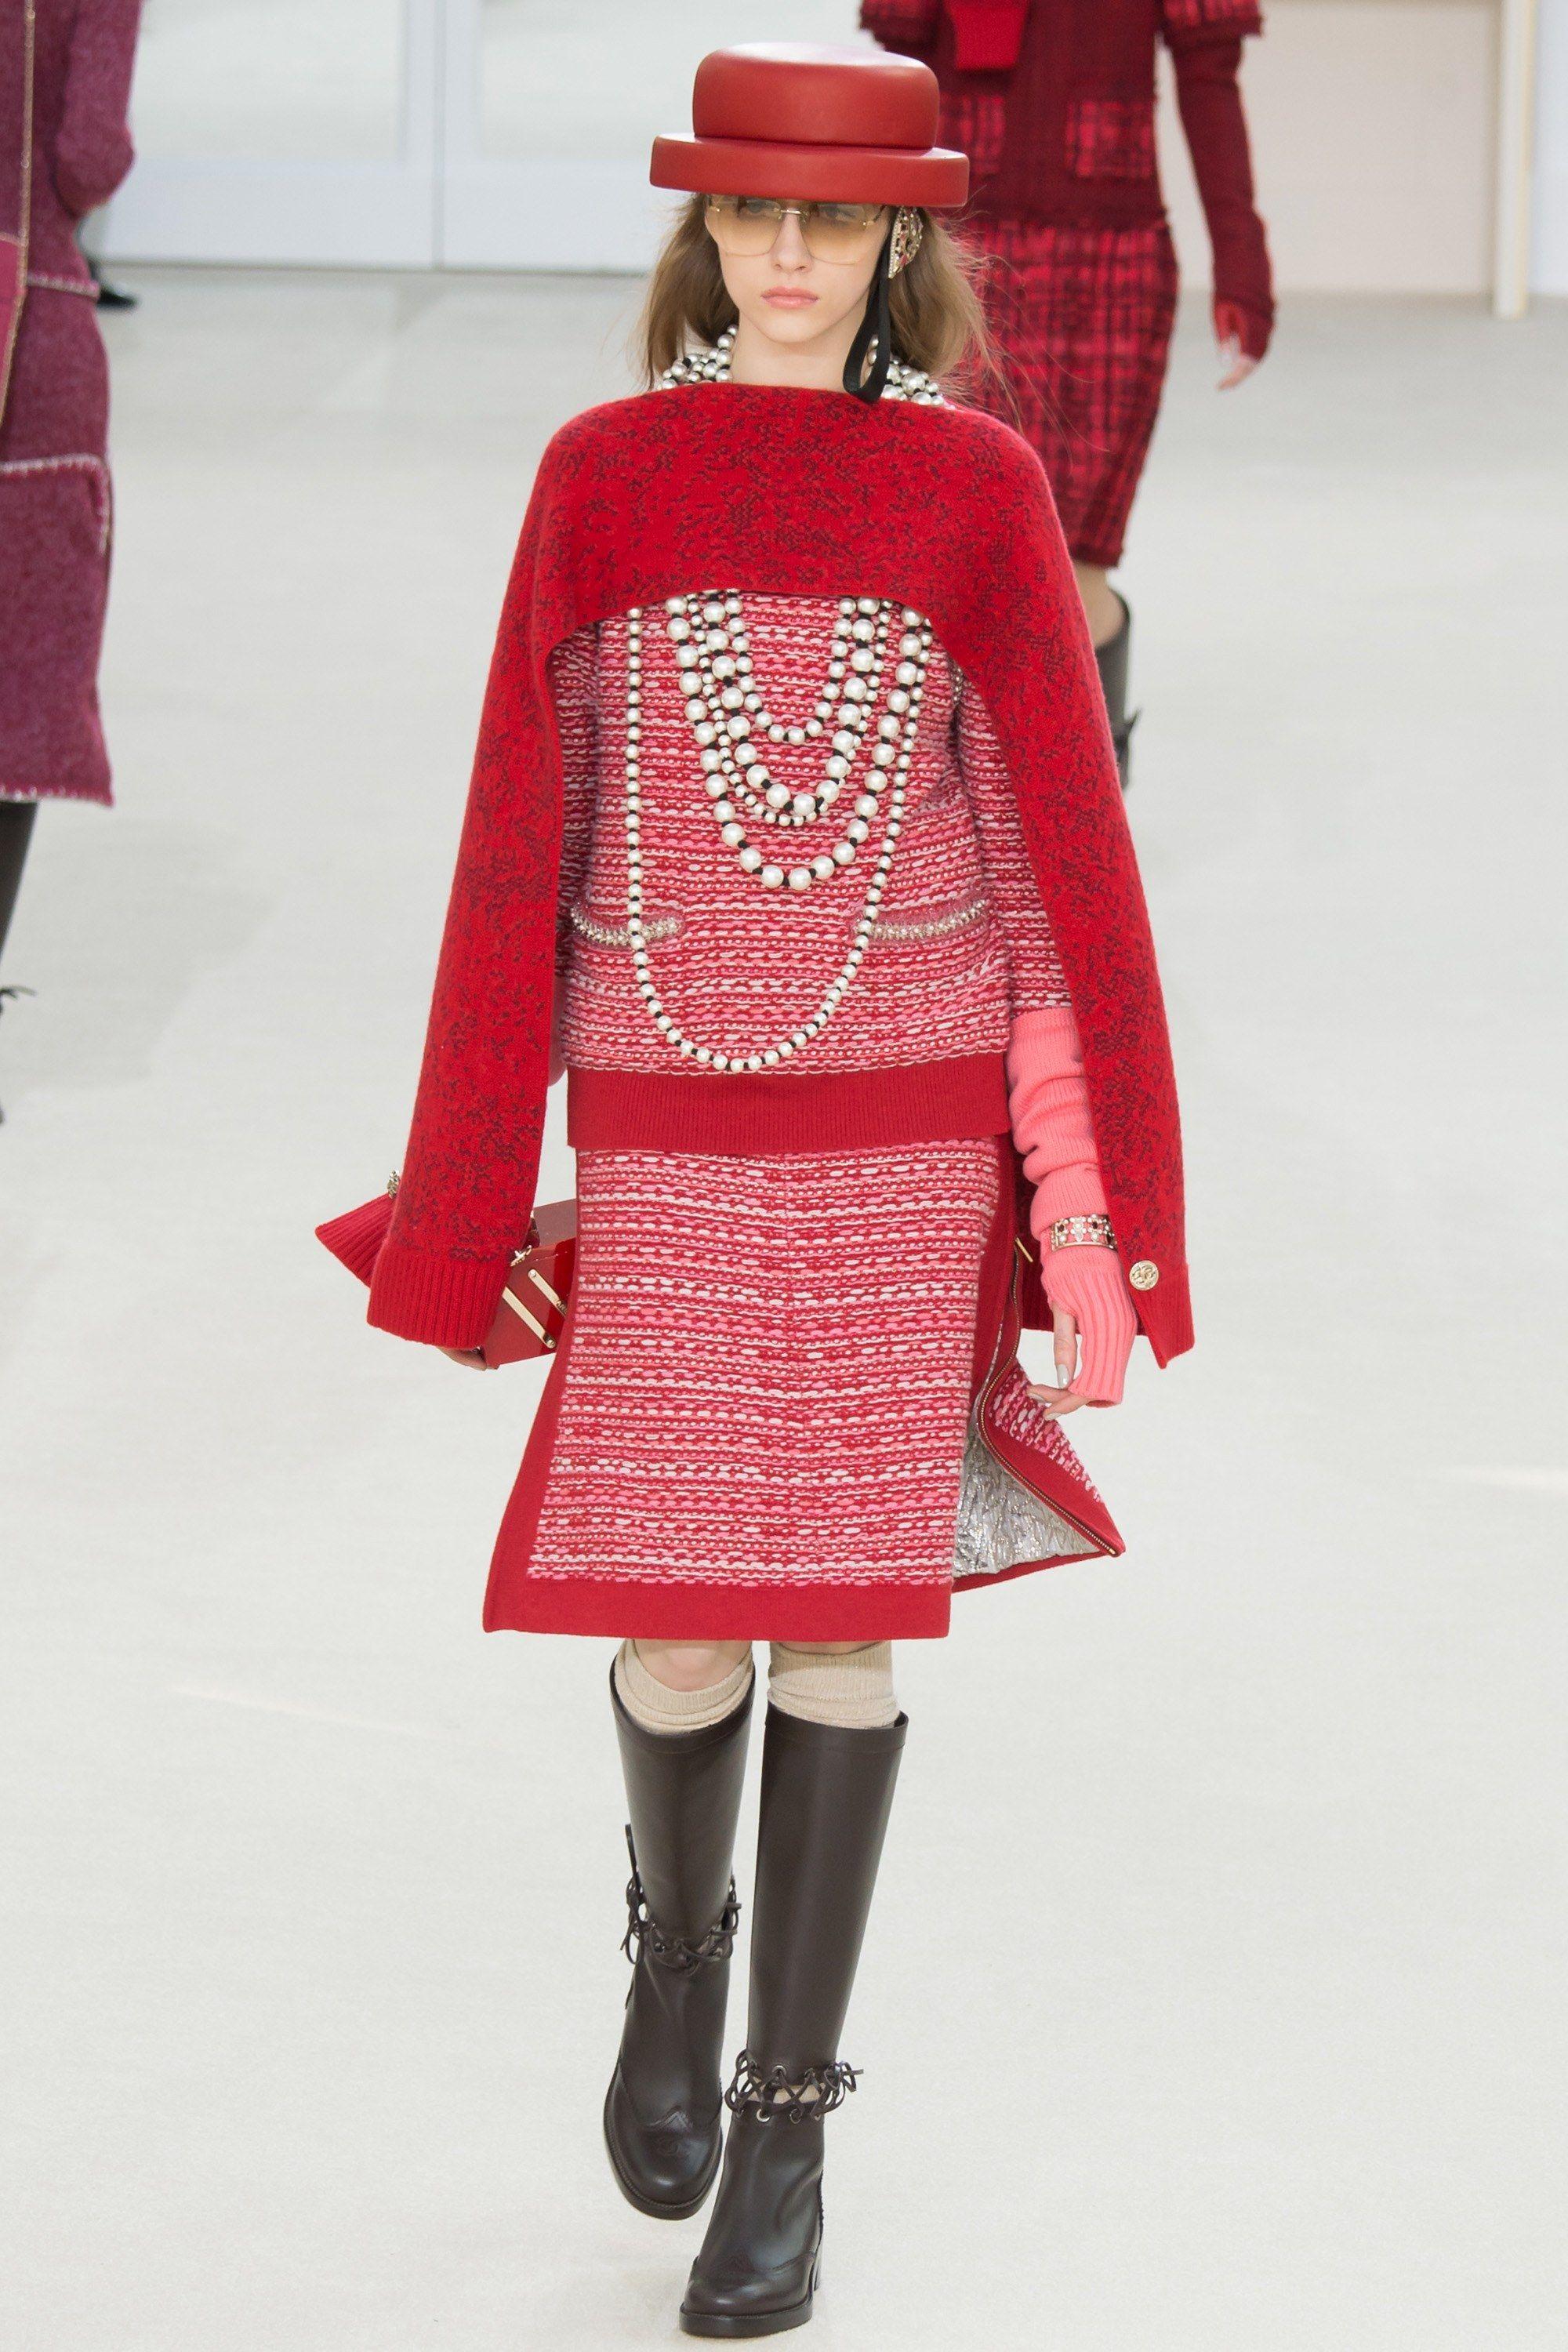 2016s Chanel Catwalk red cashmere skirt featuring a large hight waist, a front jewel logo detail, long side zip, lining in silver jacquard lining, a mid-length. 
Circa Fall 2016-2017 Catwalk Passage n°18 (see photos)
Estimated size